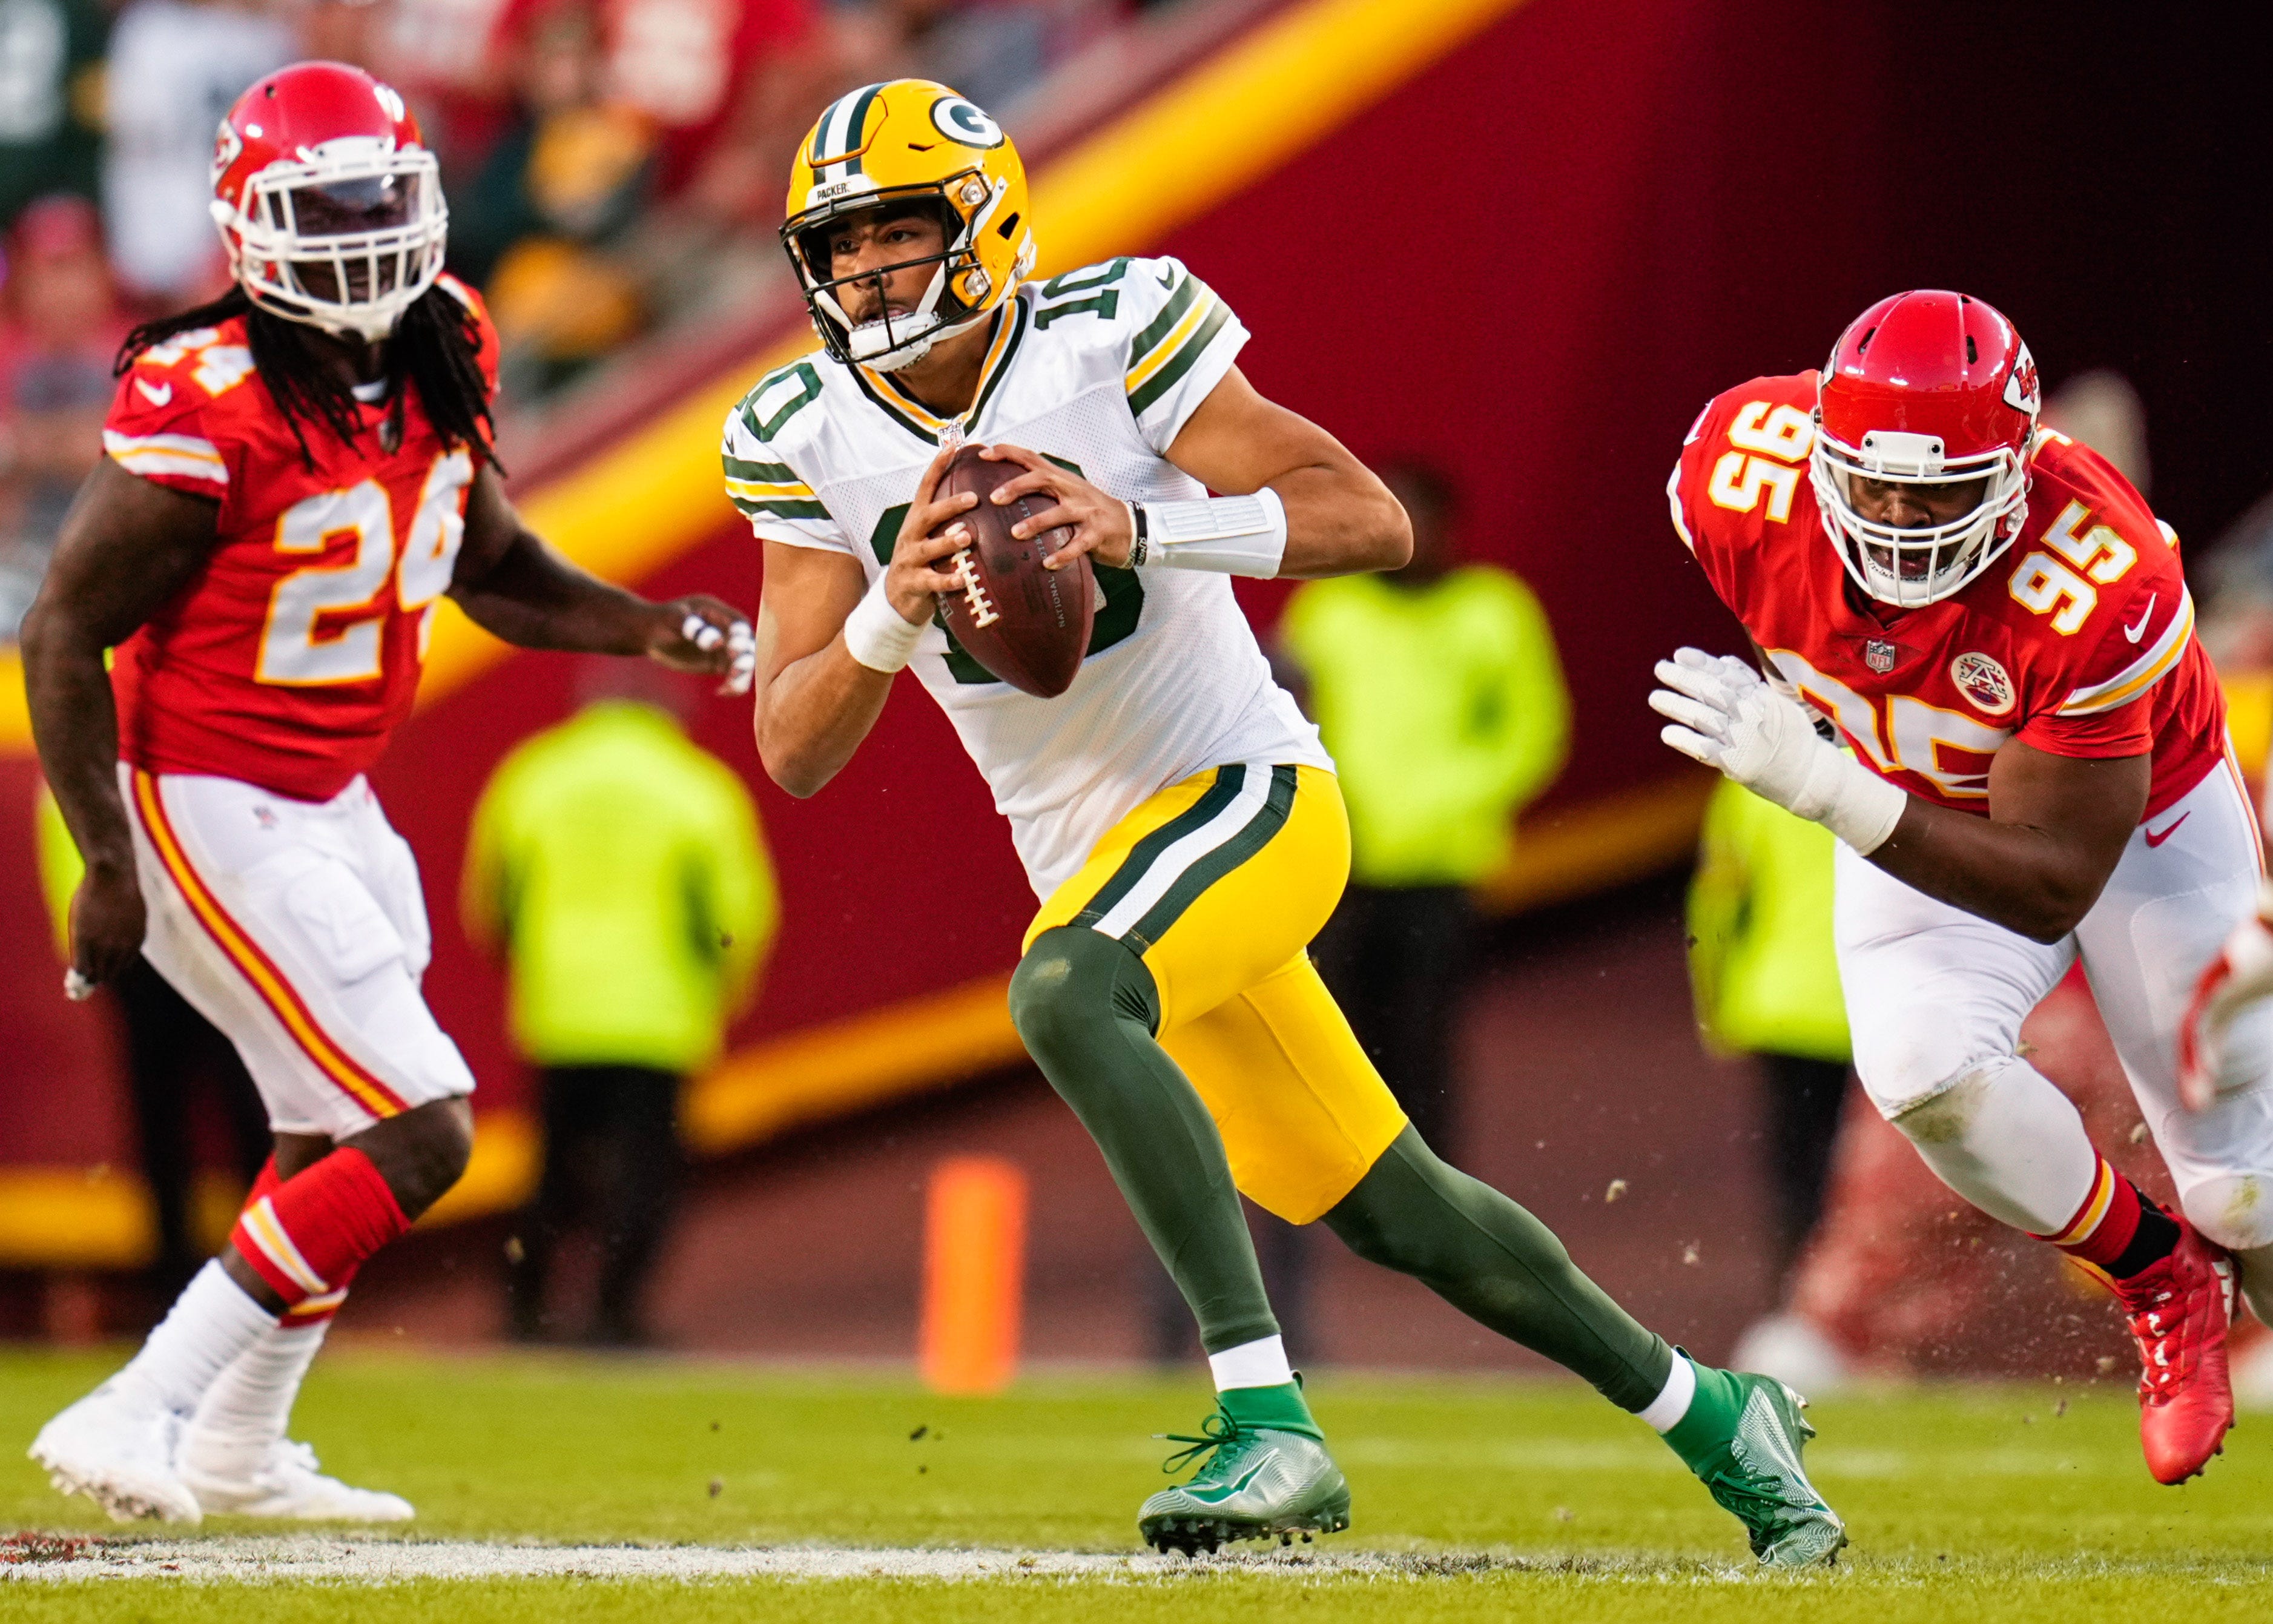 kansas city chiefs at green bay packers: predictions, picks and odds for nfl week 13 game